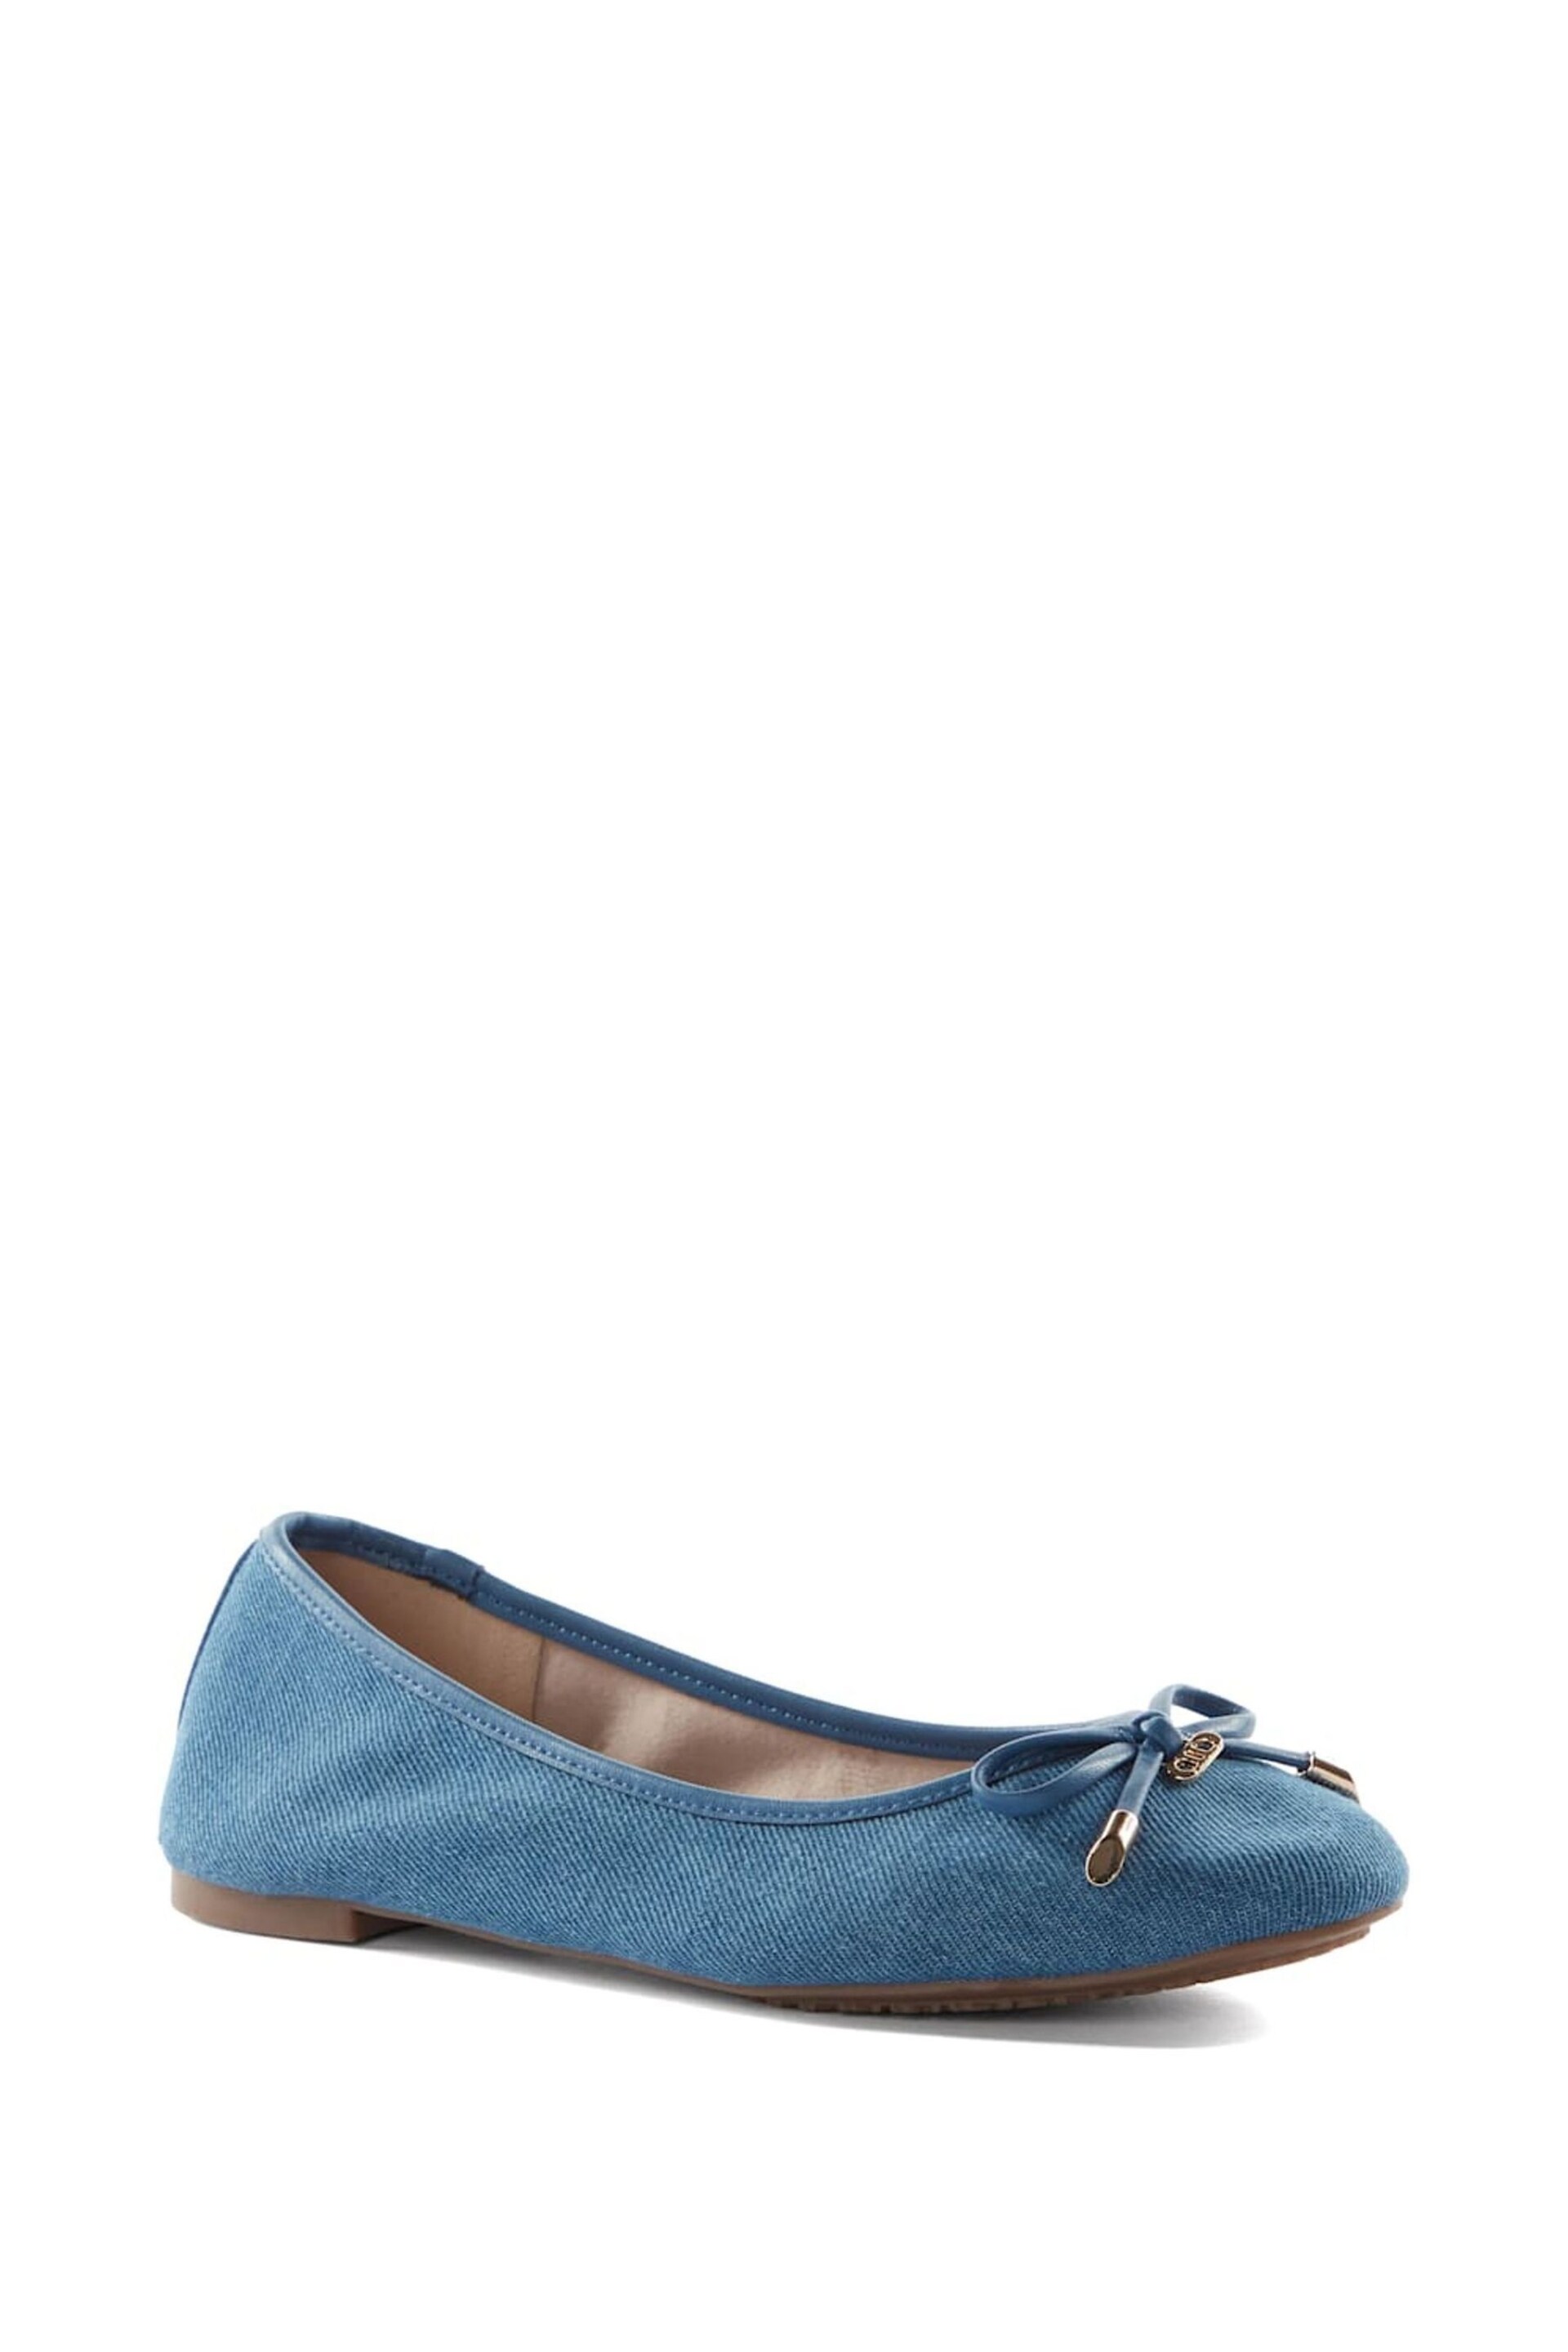 Dune London Blue Harping Branded Bow Ballerina Shoes - Image 2 of 4